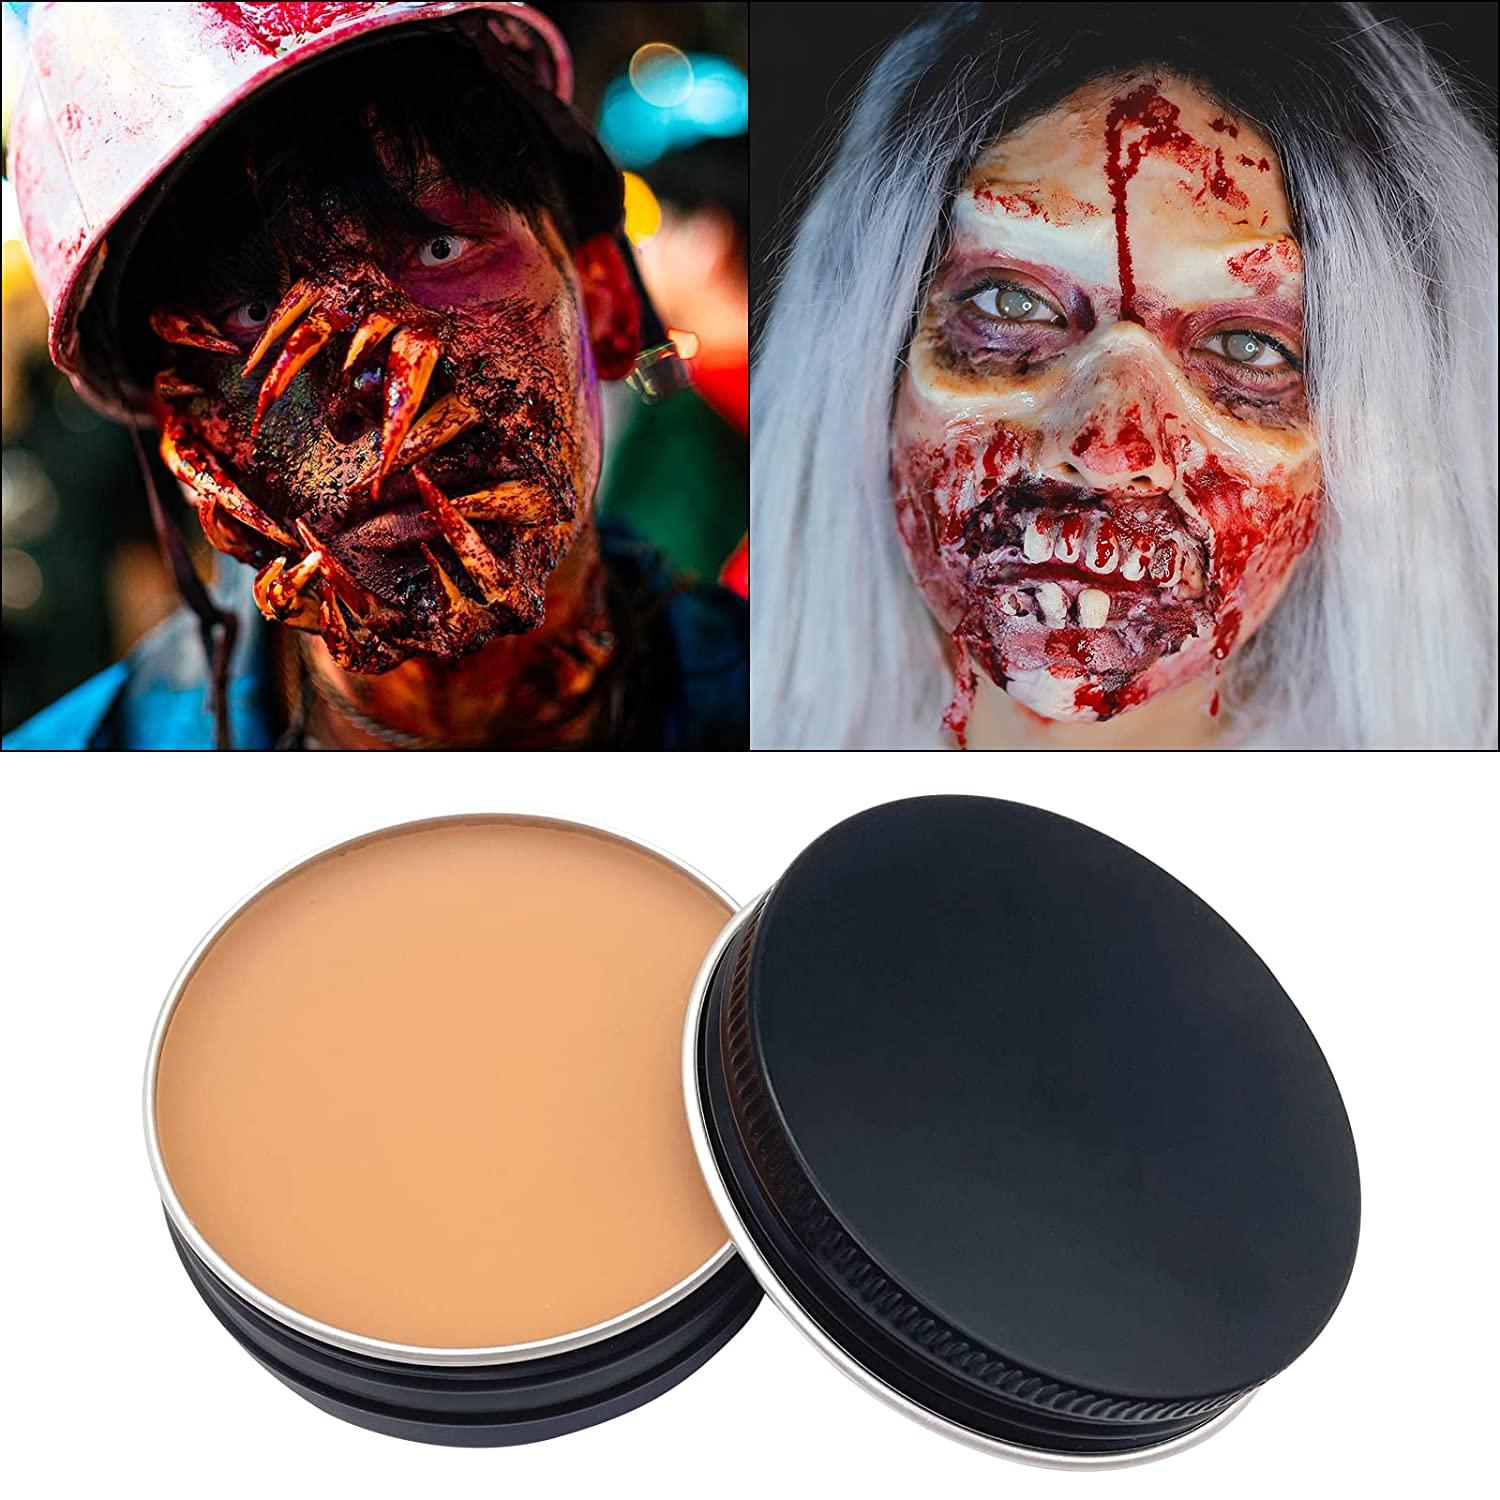 PHOEBE Halloween Makeup Kit Scar Wax SFX Makeup Kit for Special Effects  Makeup Ideal to Use for Halloween, Carnivals, Daily Prank, Haunted House 02